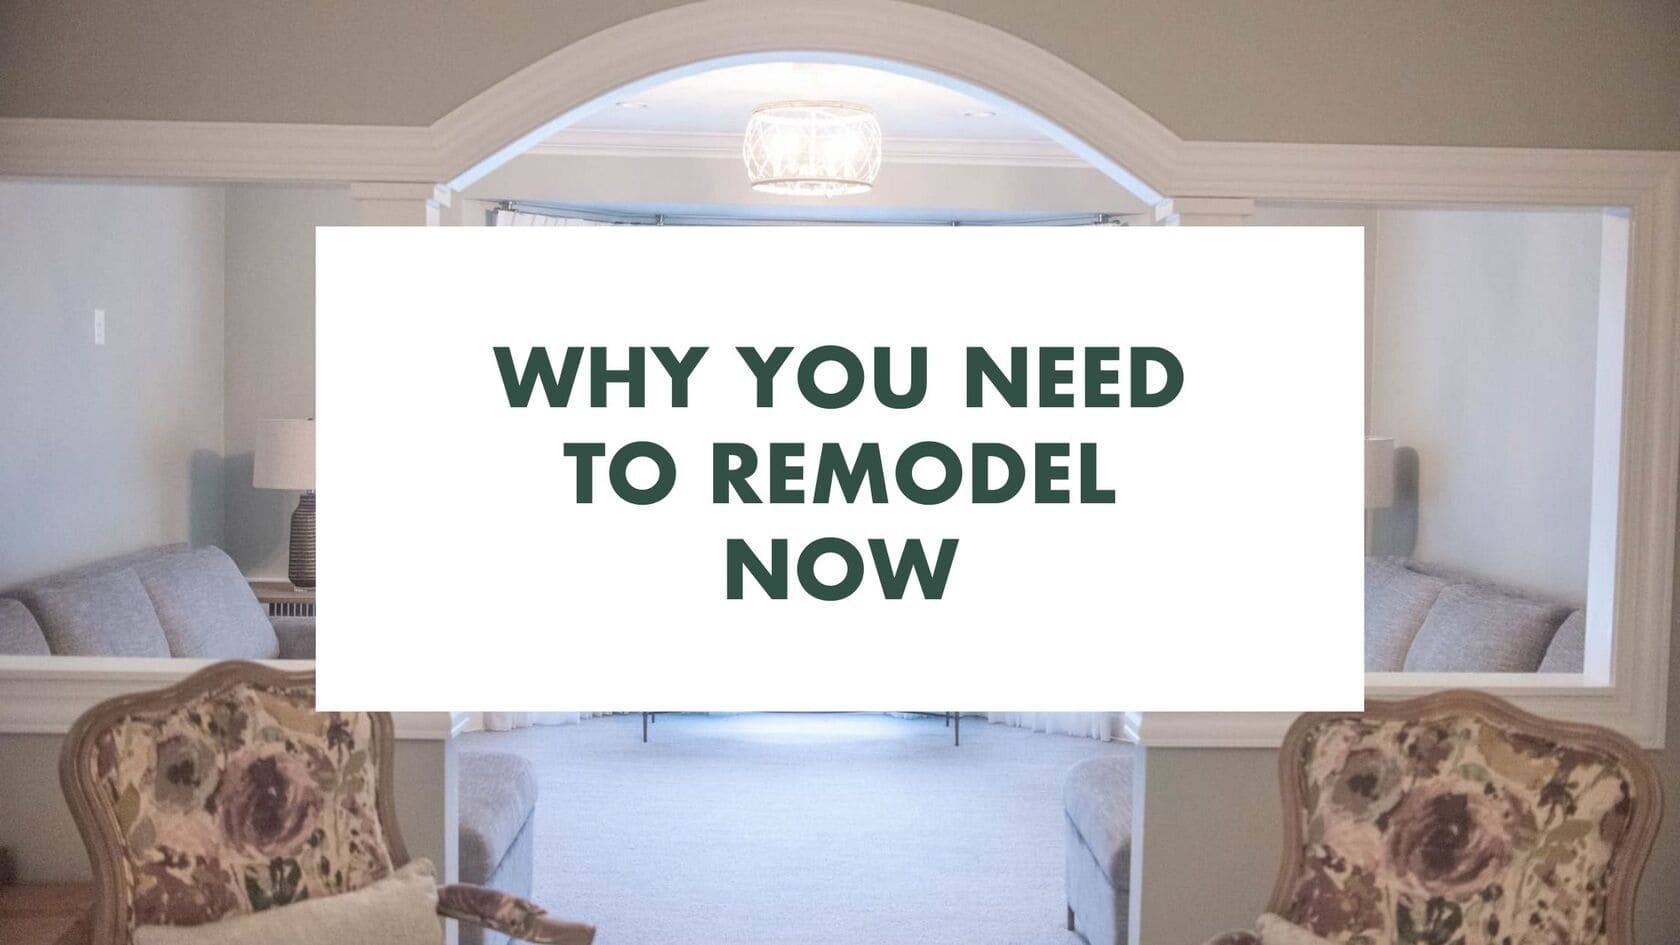 Why You Need to Remodel Now